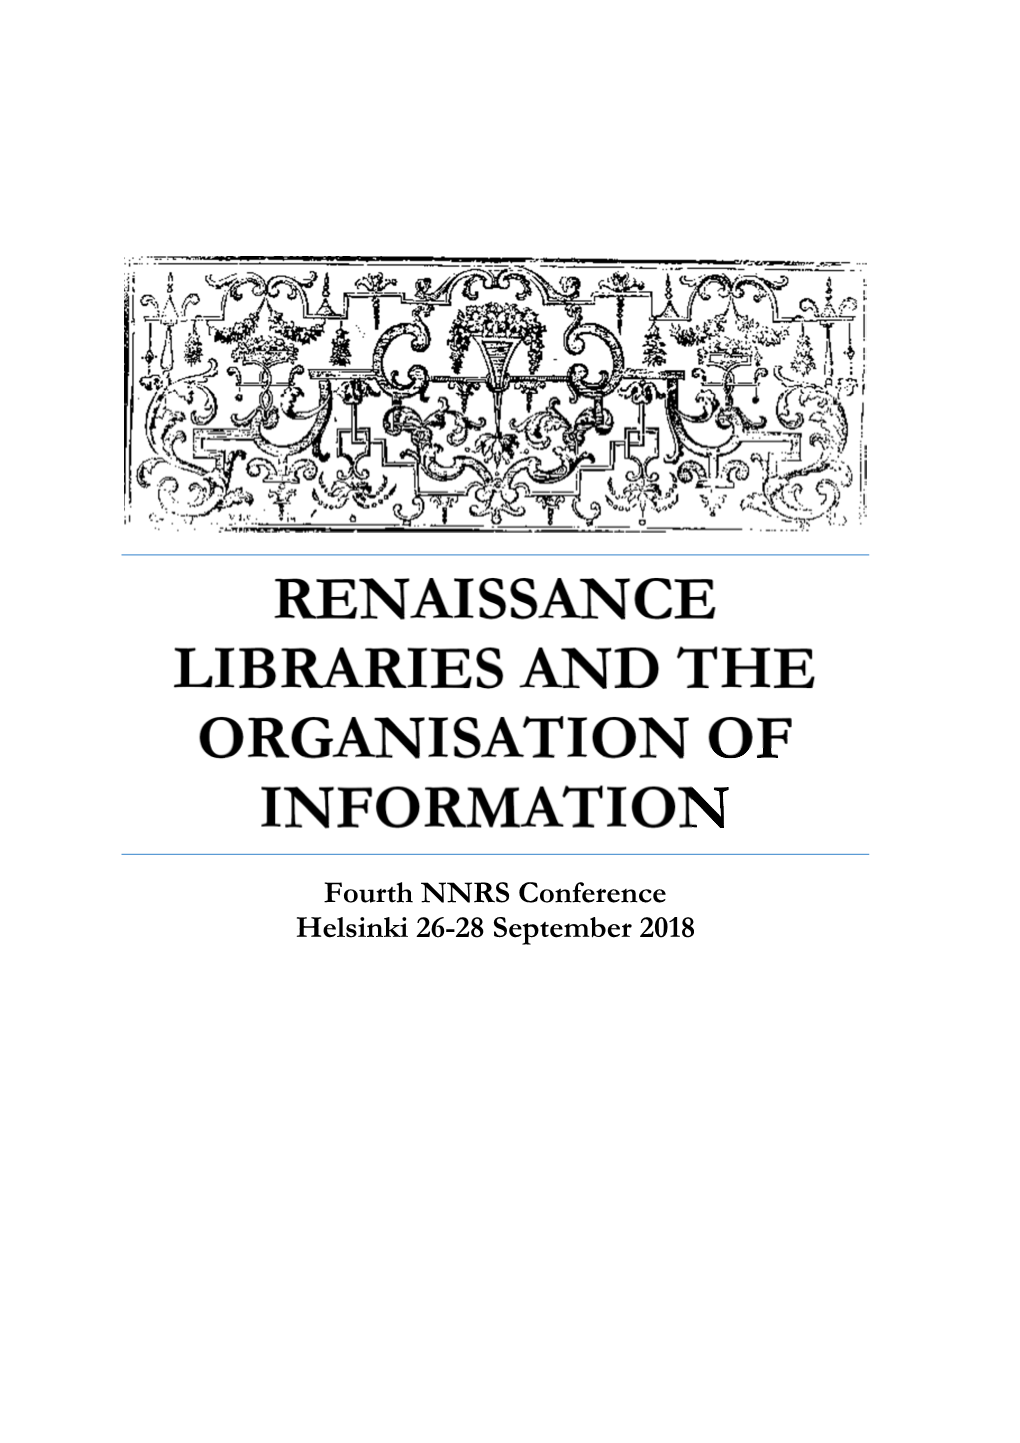 Renaissance Libraries and the Organisation of Information